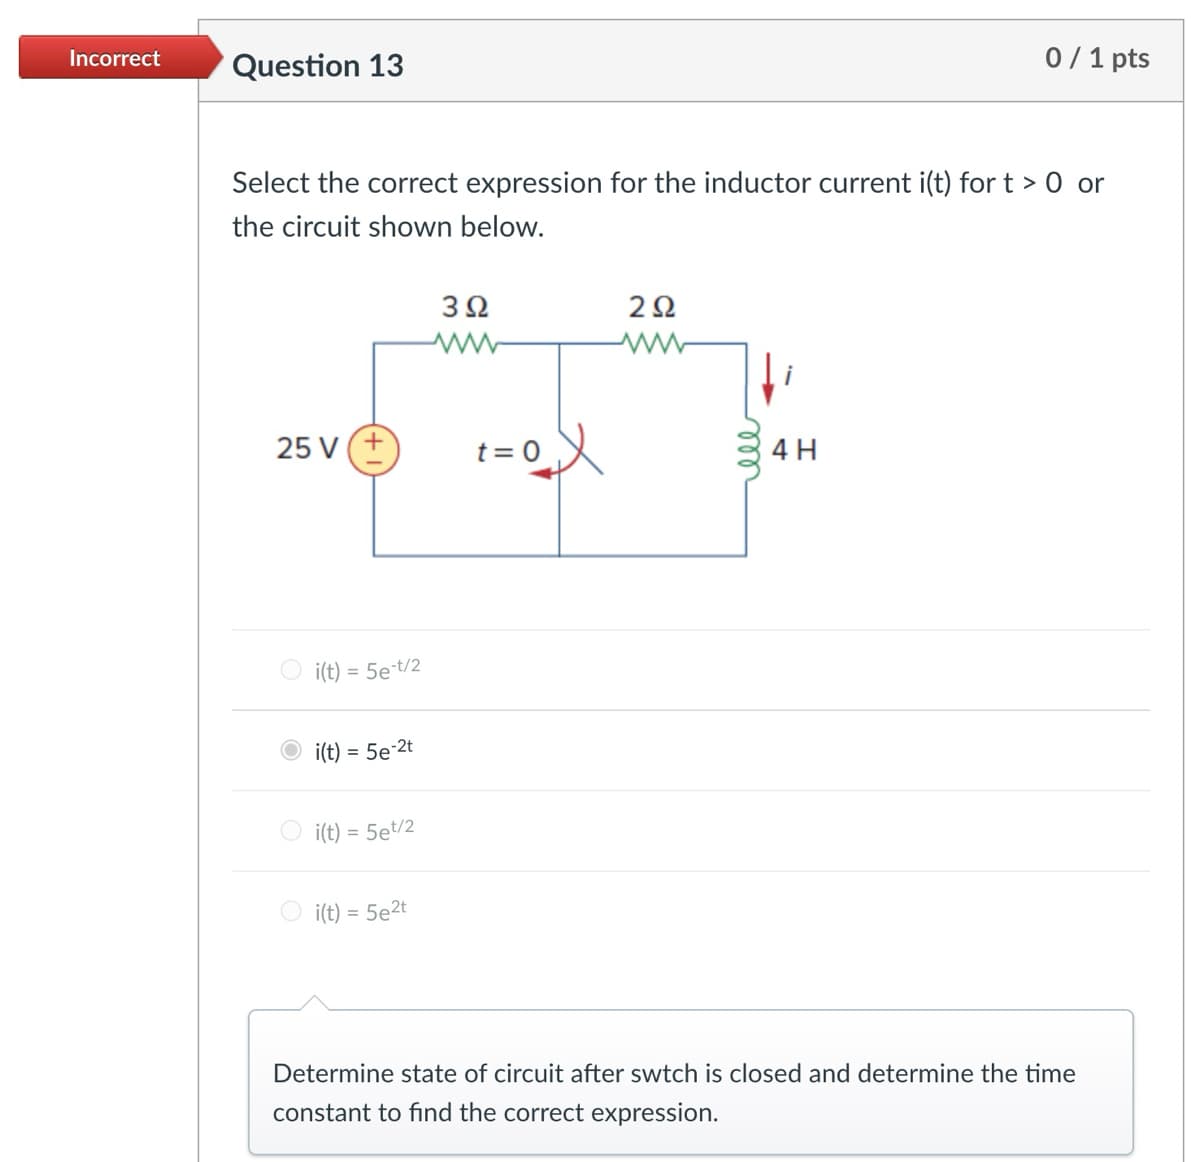 Incorrect
Question 13
0/1 pts
Select the correct expression for the inductor current i(t) for t> 0 or
the circuit shown below.
302
20
ww
www
25 V (+
t=0
0 = 5e-t/2
i(t) =
i(t) = 5e-2t
i(t) = 5et/2
i(t) = 5e2t
ele
4H
Determine state of circuit after swtch is closed and determine the time
constant to find the correct expression.